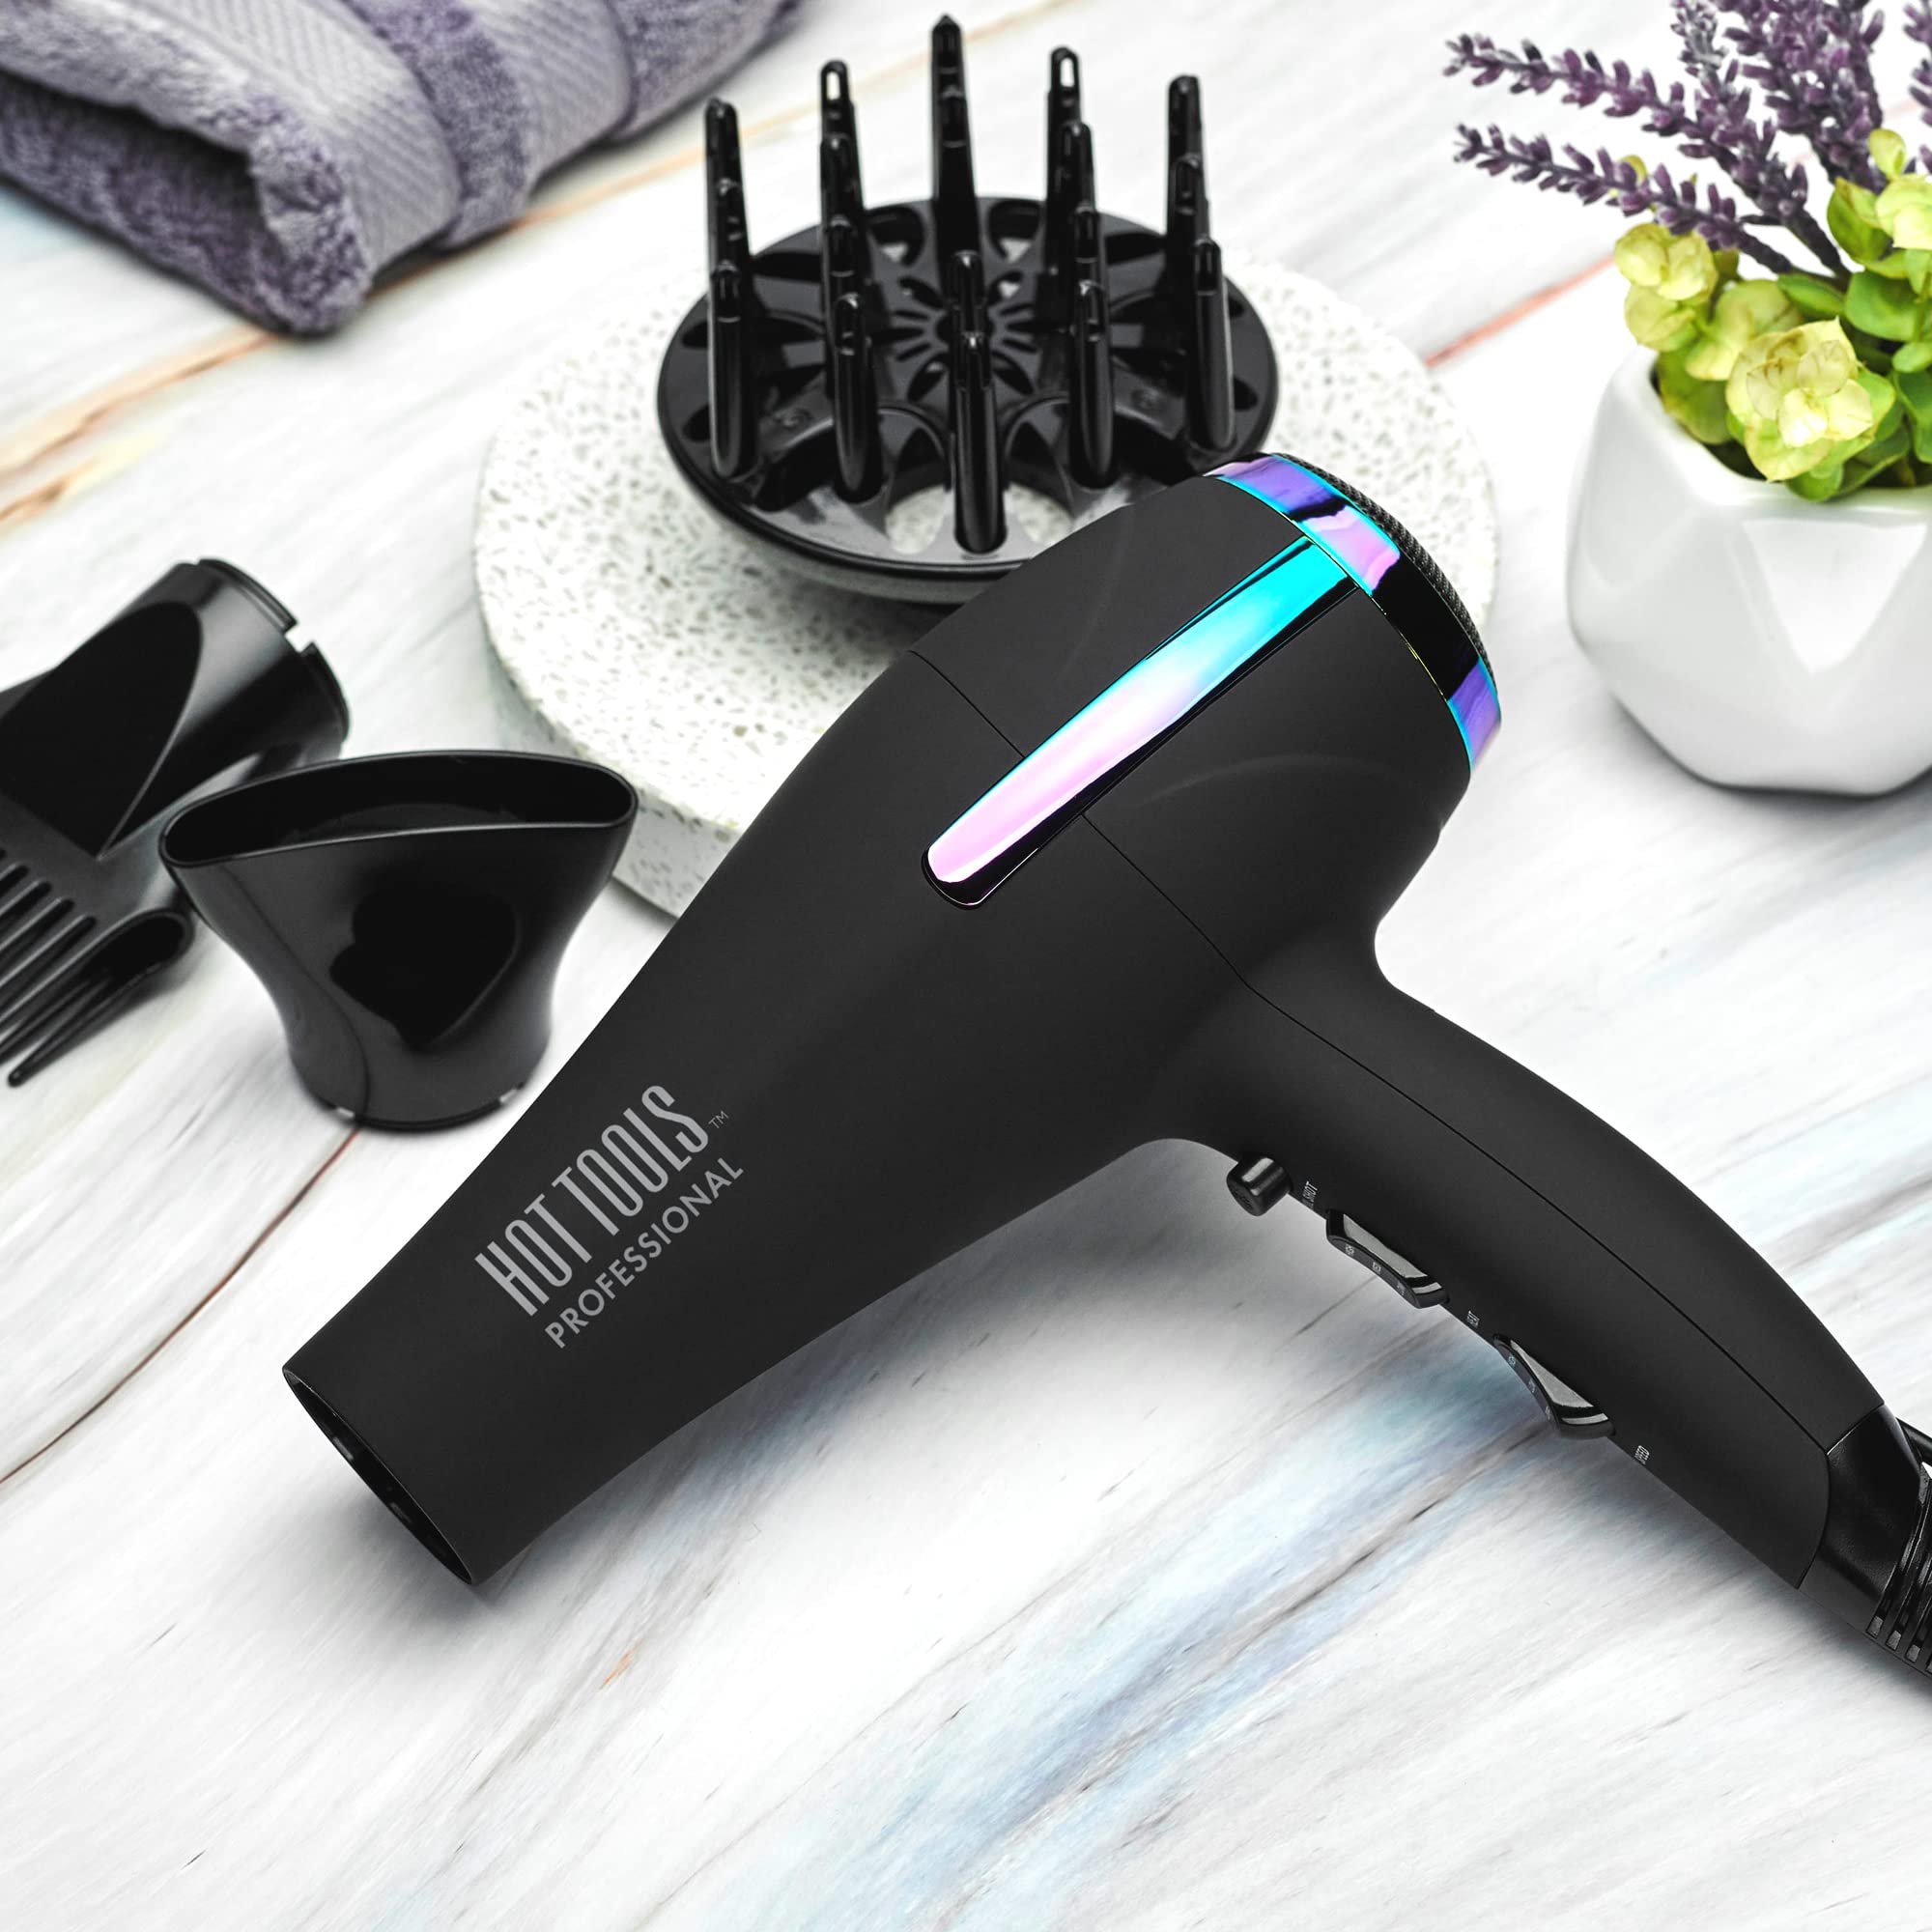 Hot Tools Professional Rainbow Turbo Ceramic Hair Dryer | 1875W Powerful and Quiet Blowouts